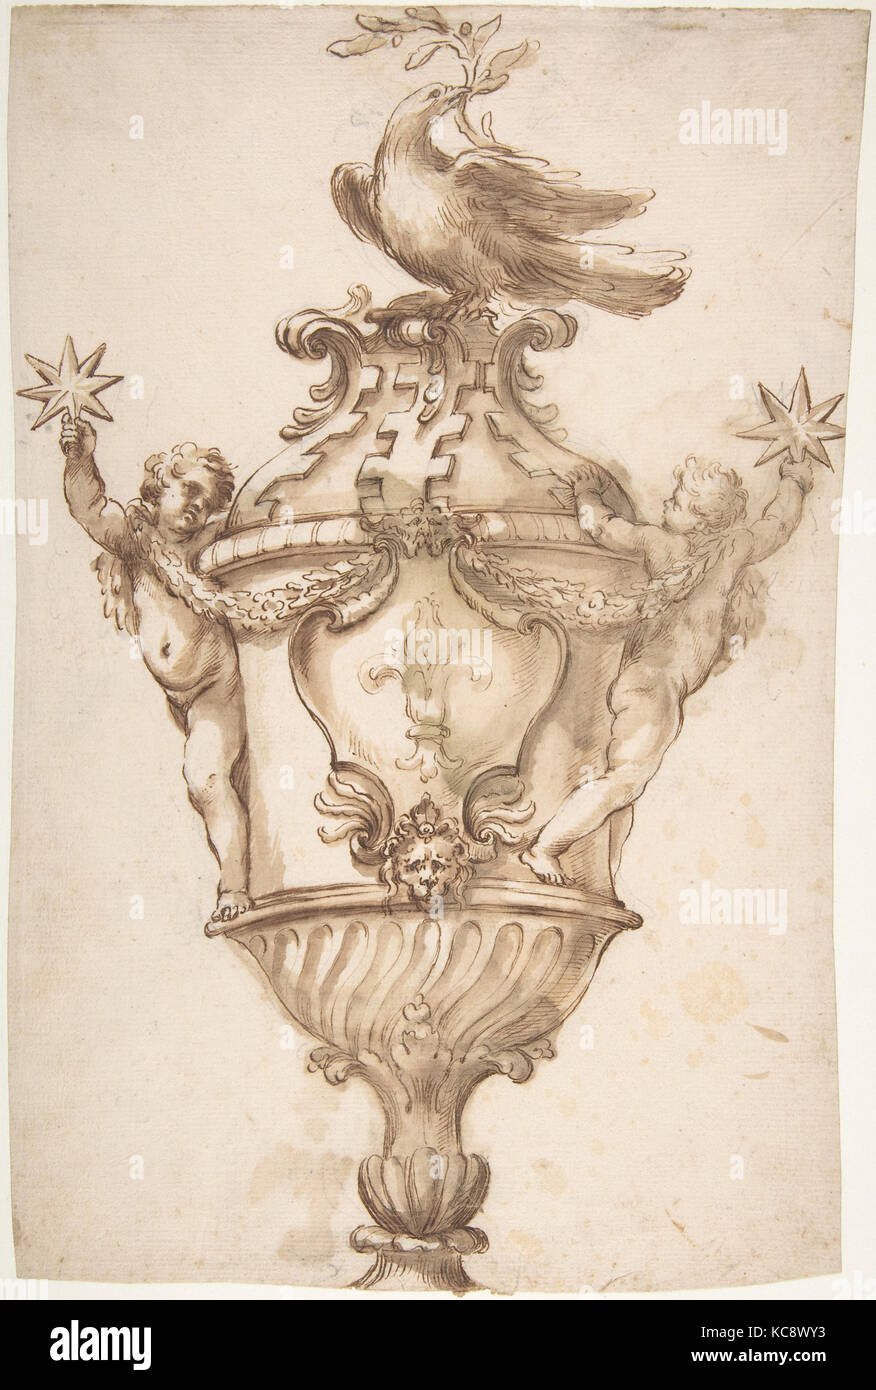 Design for a Covered Vase with the Arms of the Aldobrandini and Pamphilj Families, Alessandro Algardi, ca. 1647 Stock Photo